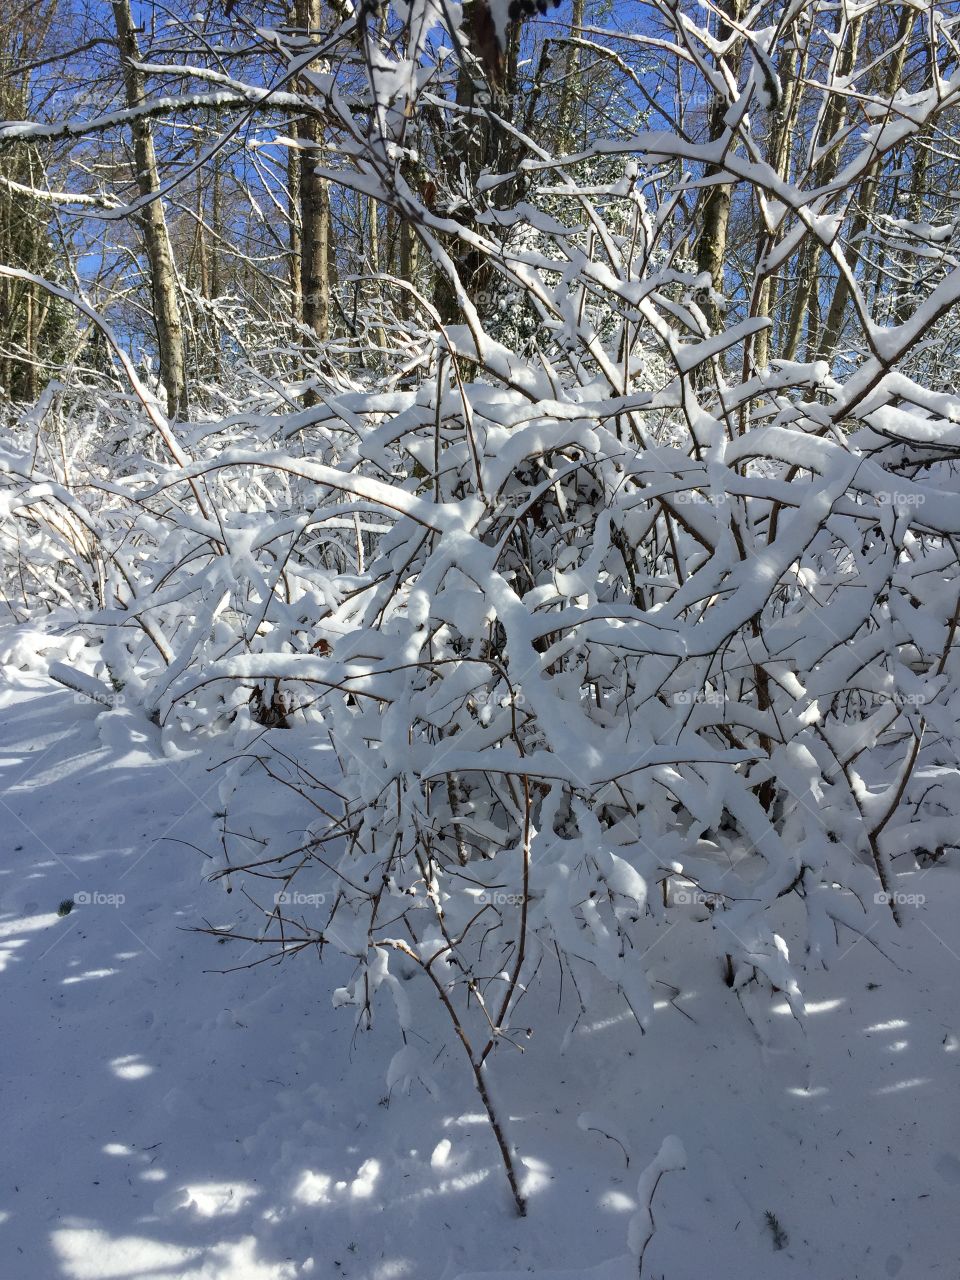 Snow settling on delicate twigs and branches atop Burnaby Mountain as I trekked through the trails to find the top